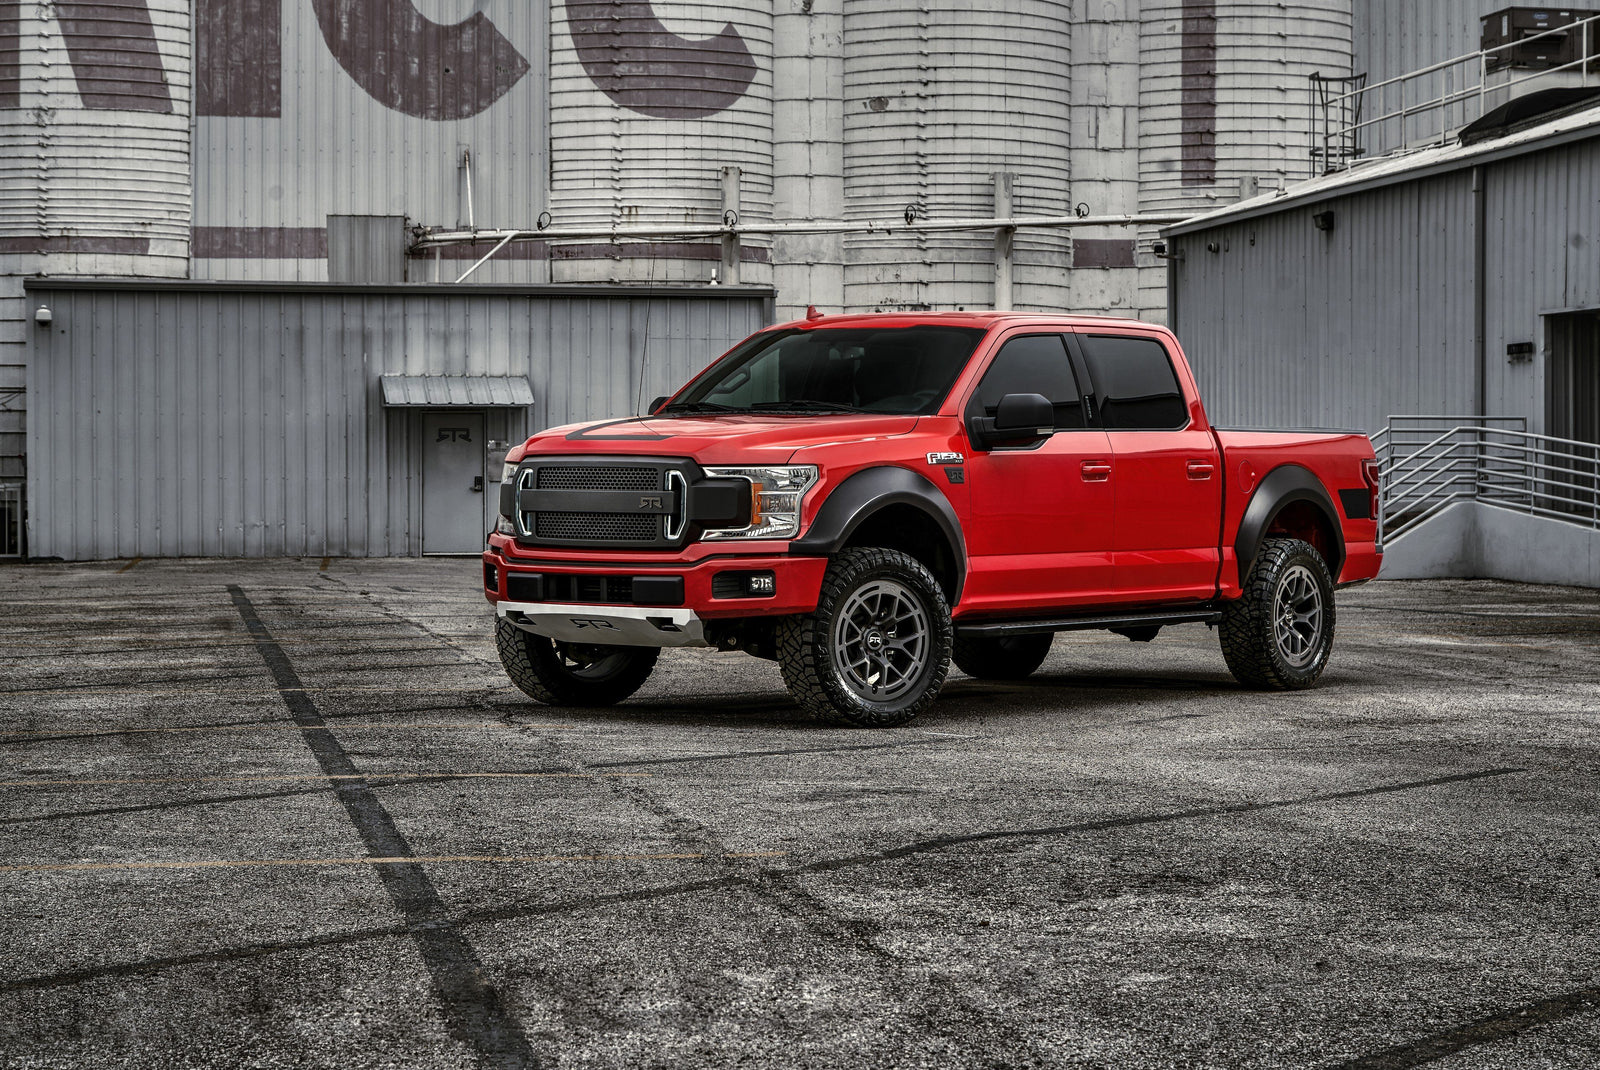 2019 Ford F-150 RTR Pickup Truck Is a Hoon-Ready Machine for Those Who -  RTR Vehicles